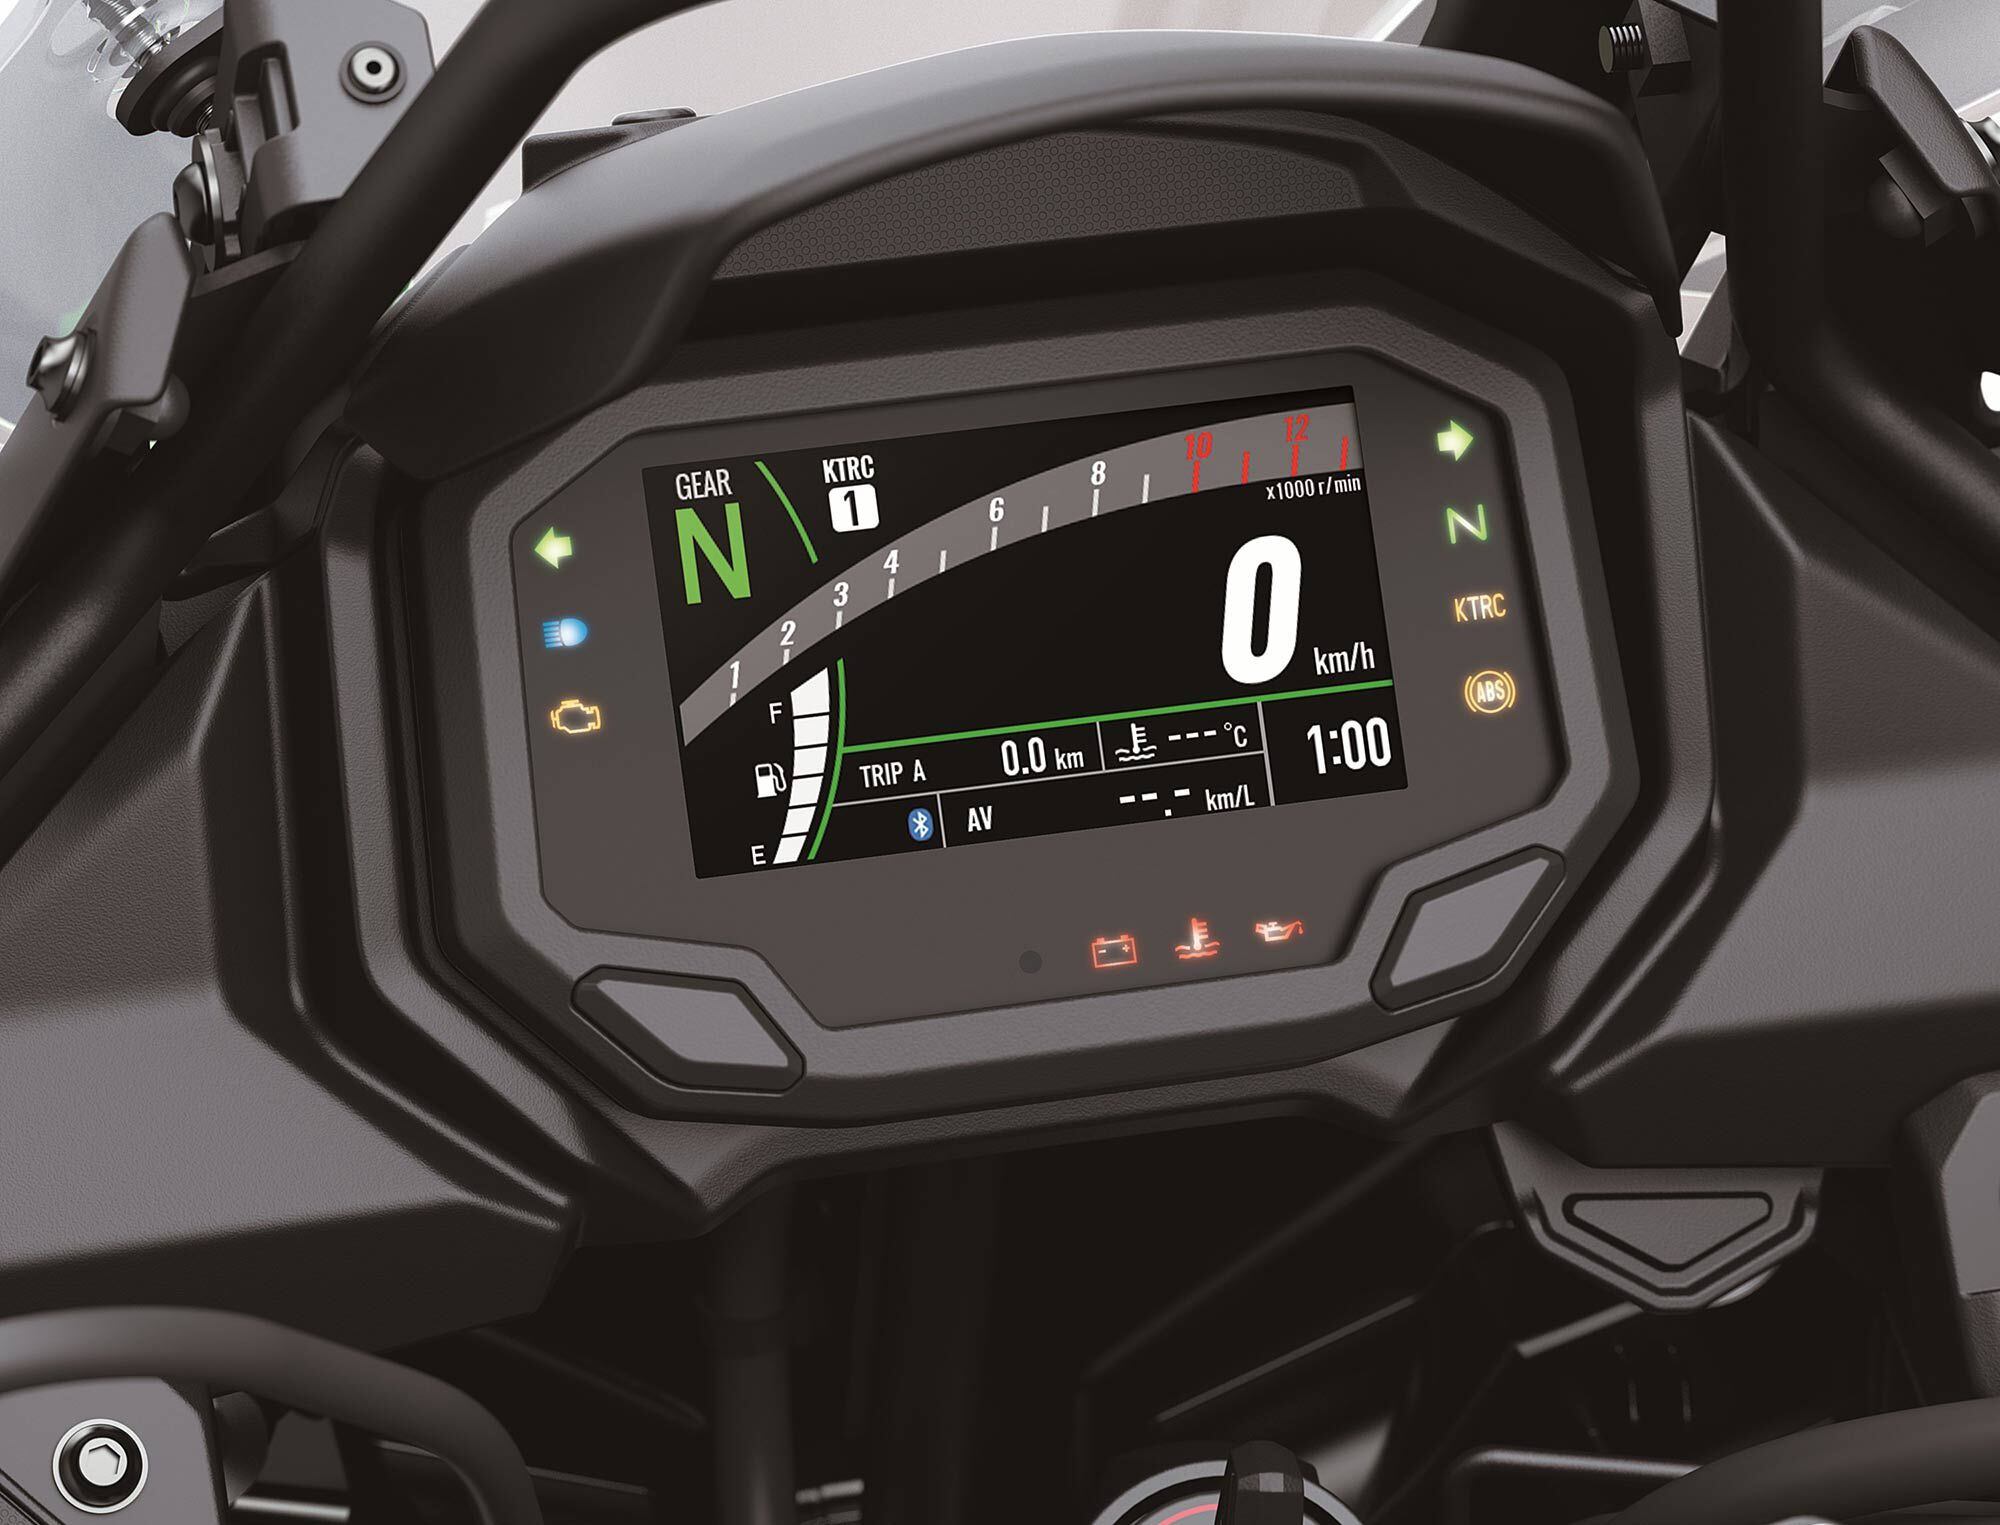 A look at the new 4.5-inch full-color TFT instrument panel.